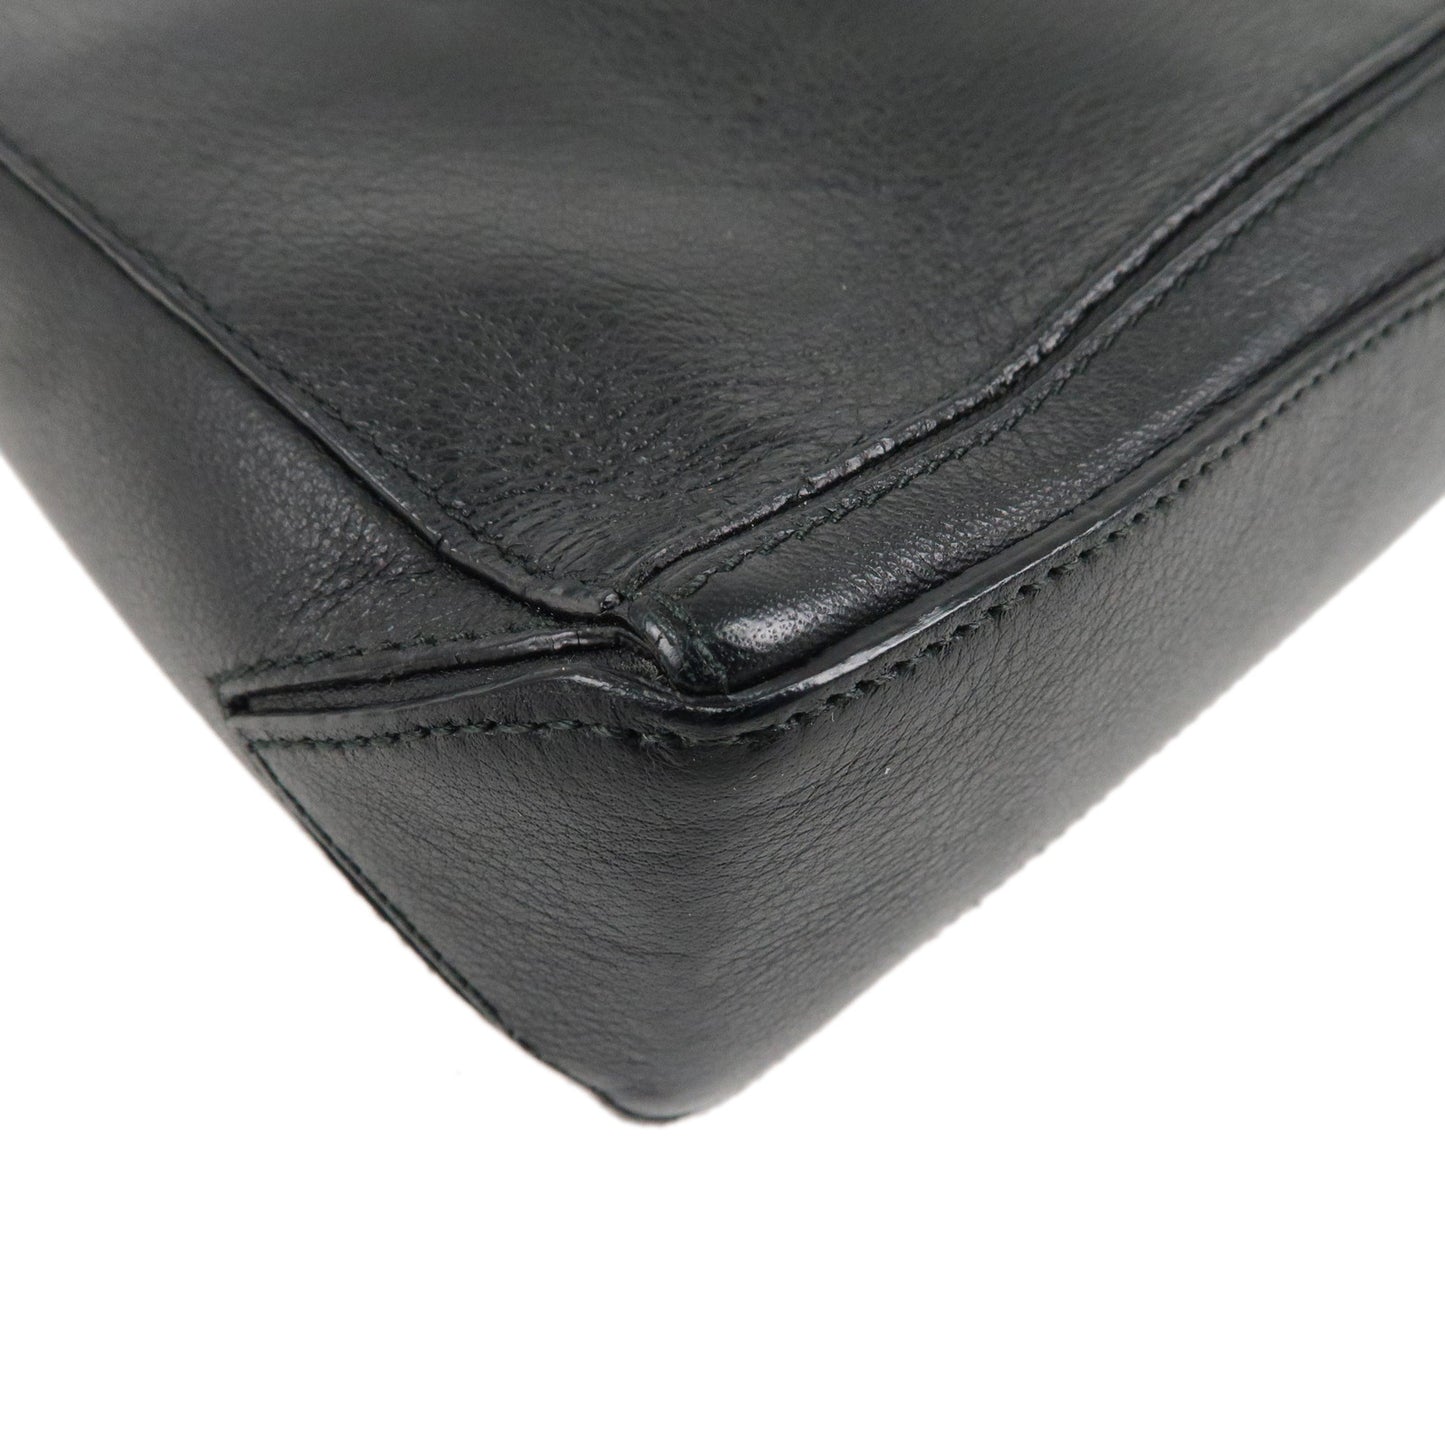 LOEWE Leather 2WAY Puzzle Pouch Clutch Bag Black 322.89.M87